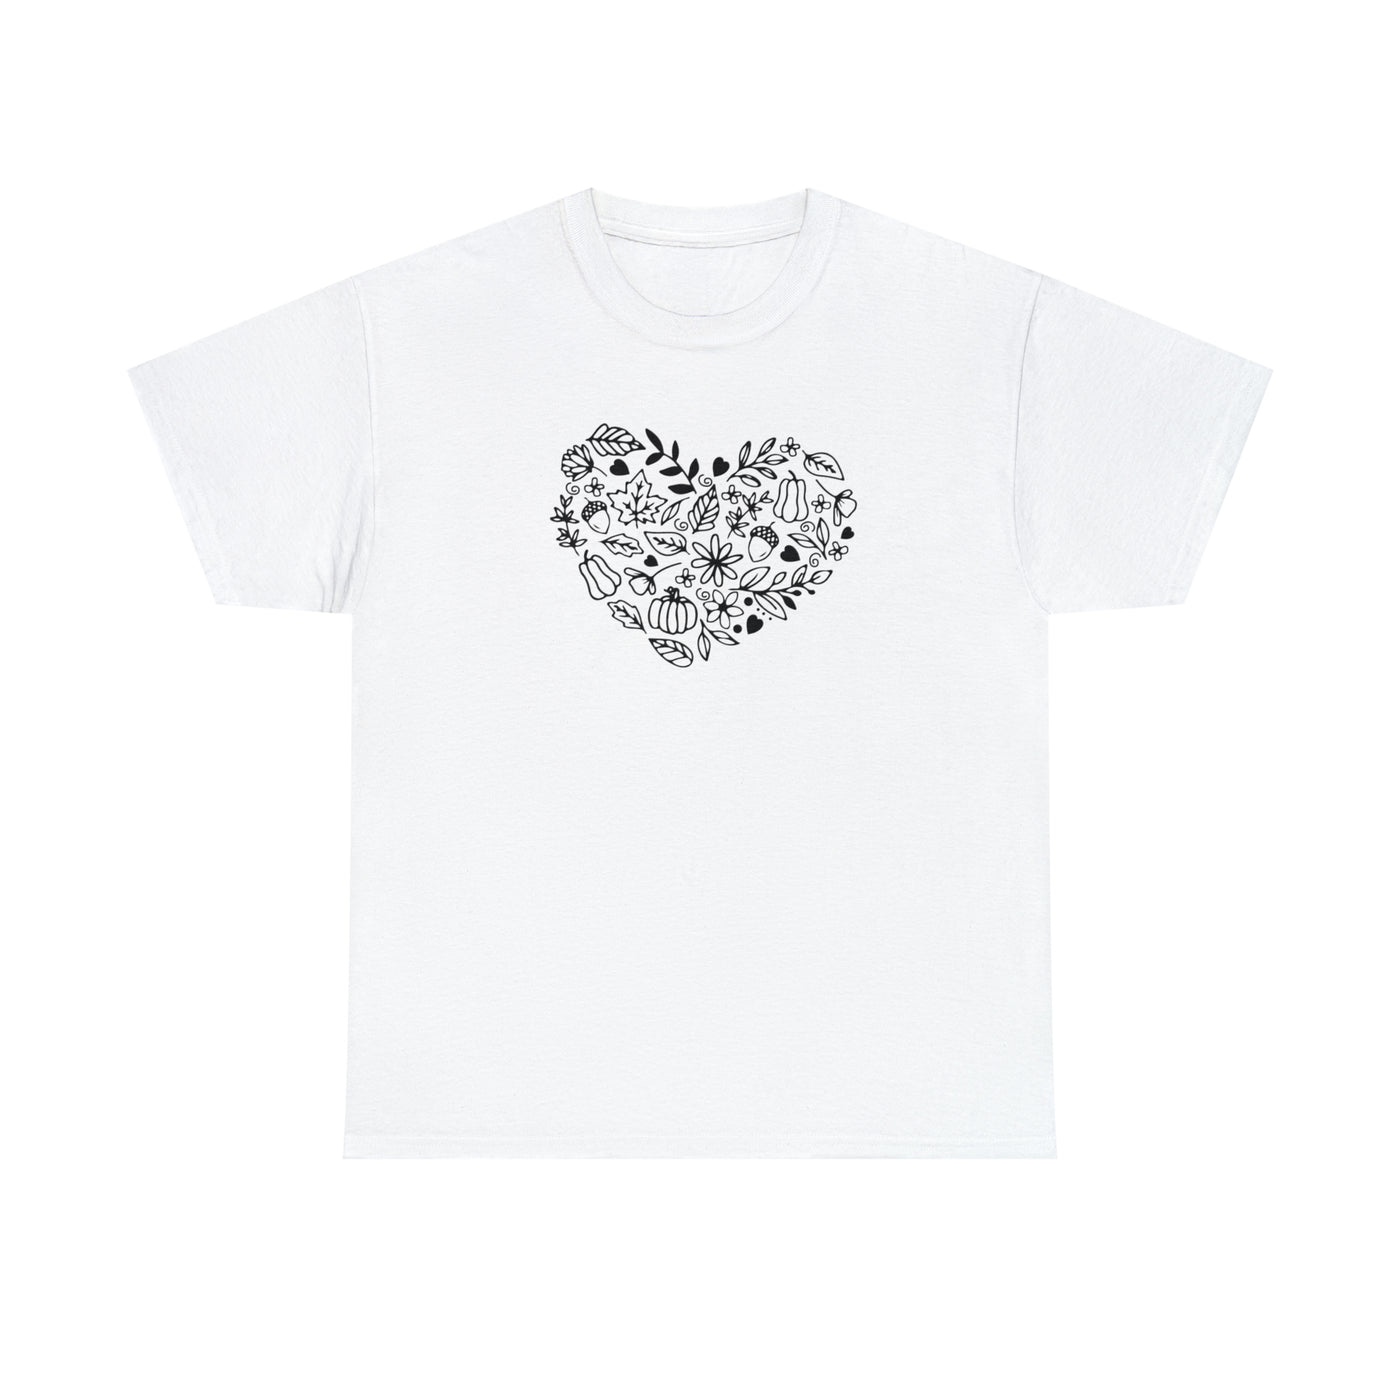 Heart Printed T-Shirts | Unisex Printed Tee | Let's Travel